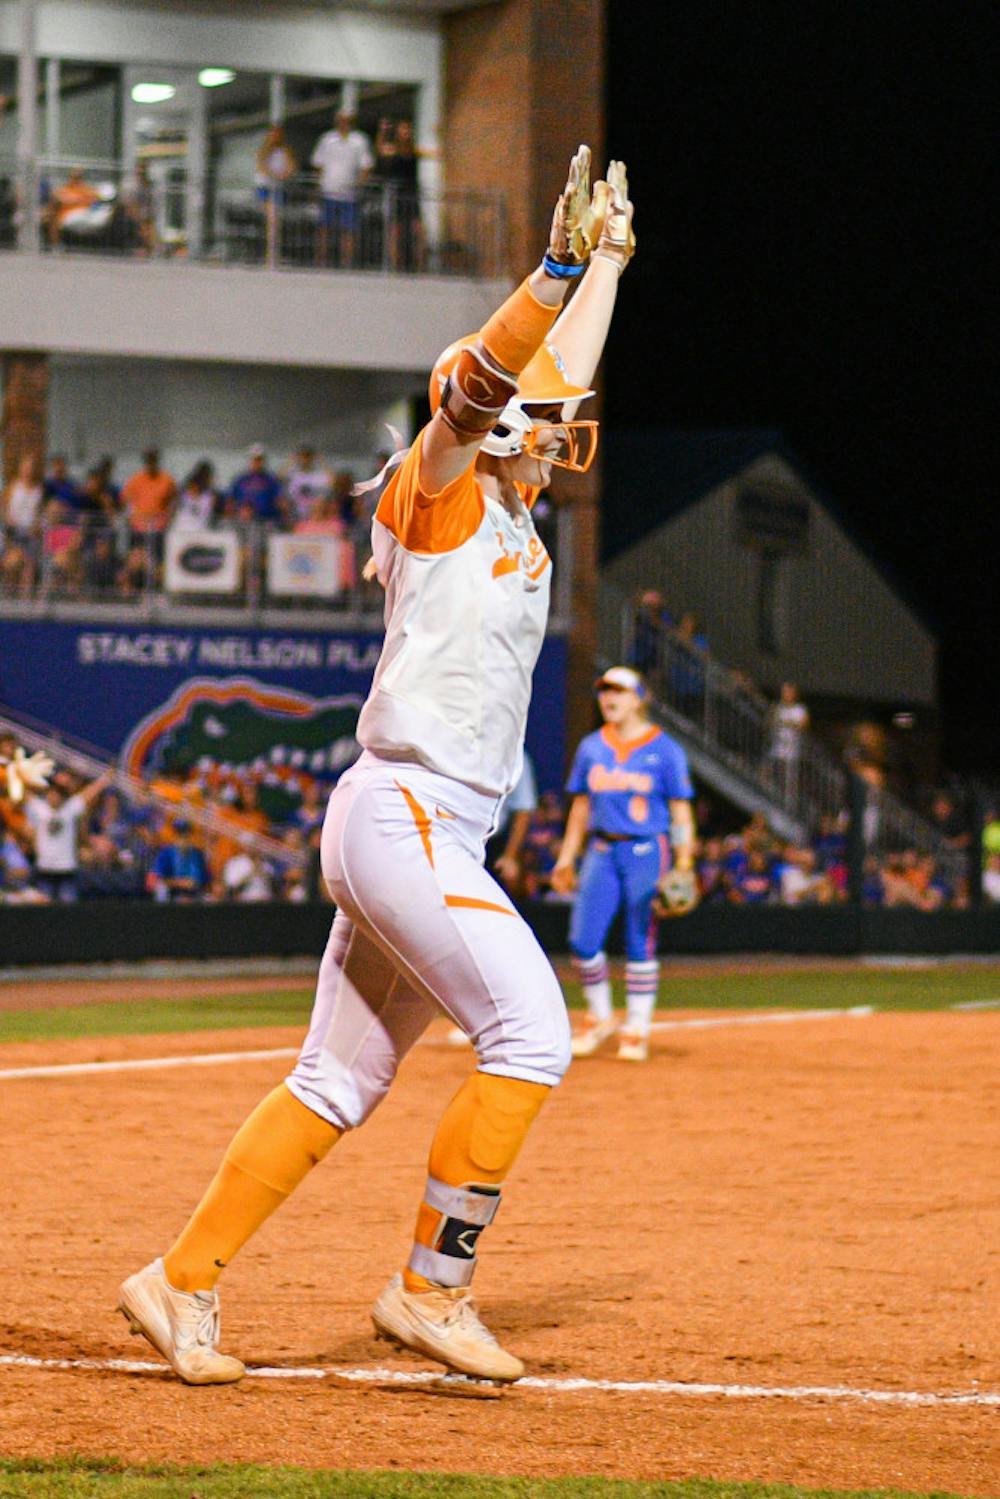 <p>Tennessee forced a do-or-die Game 3 in the Gainesville Super Regional with an extra-innings win over Florida on Saturday.</p>